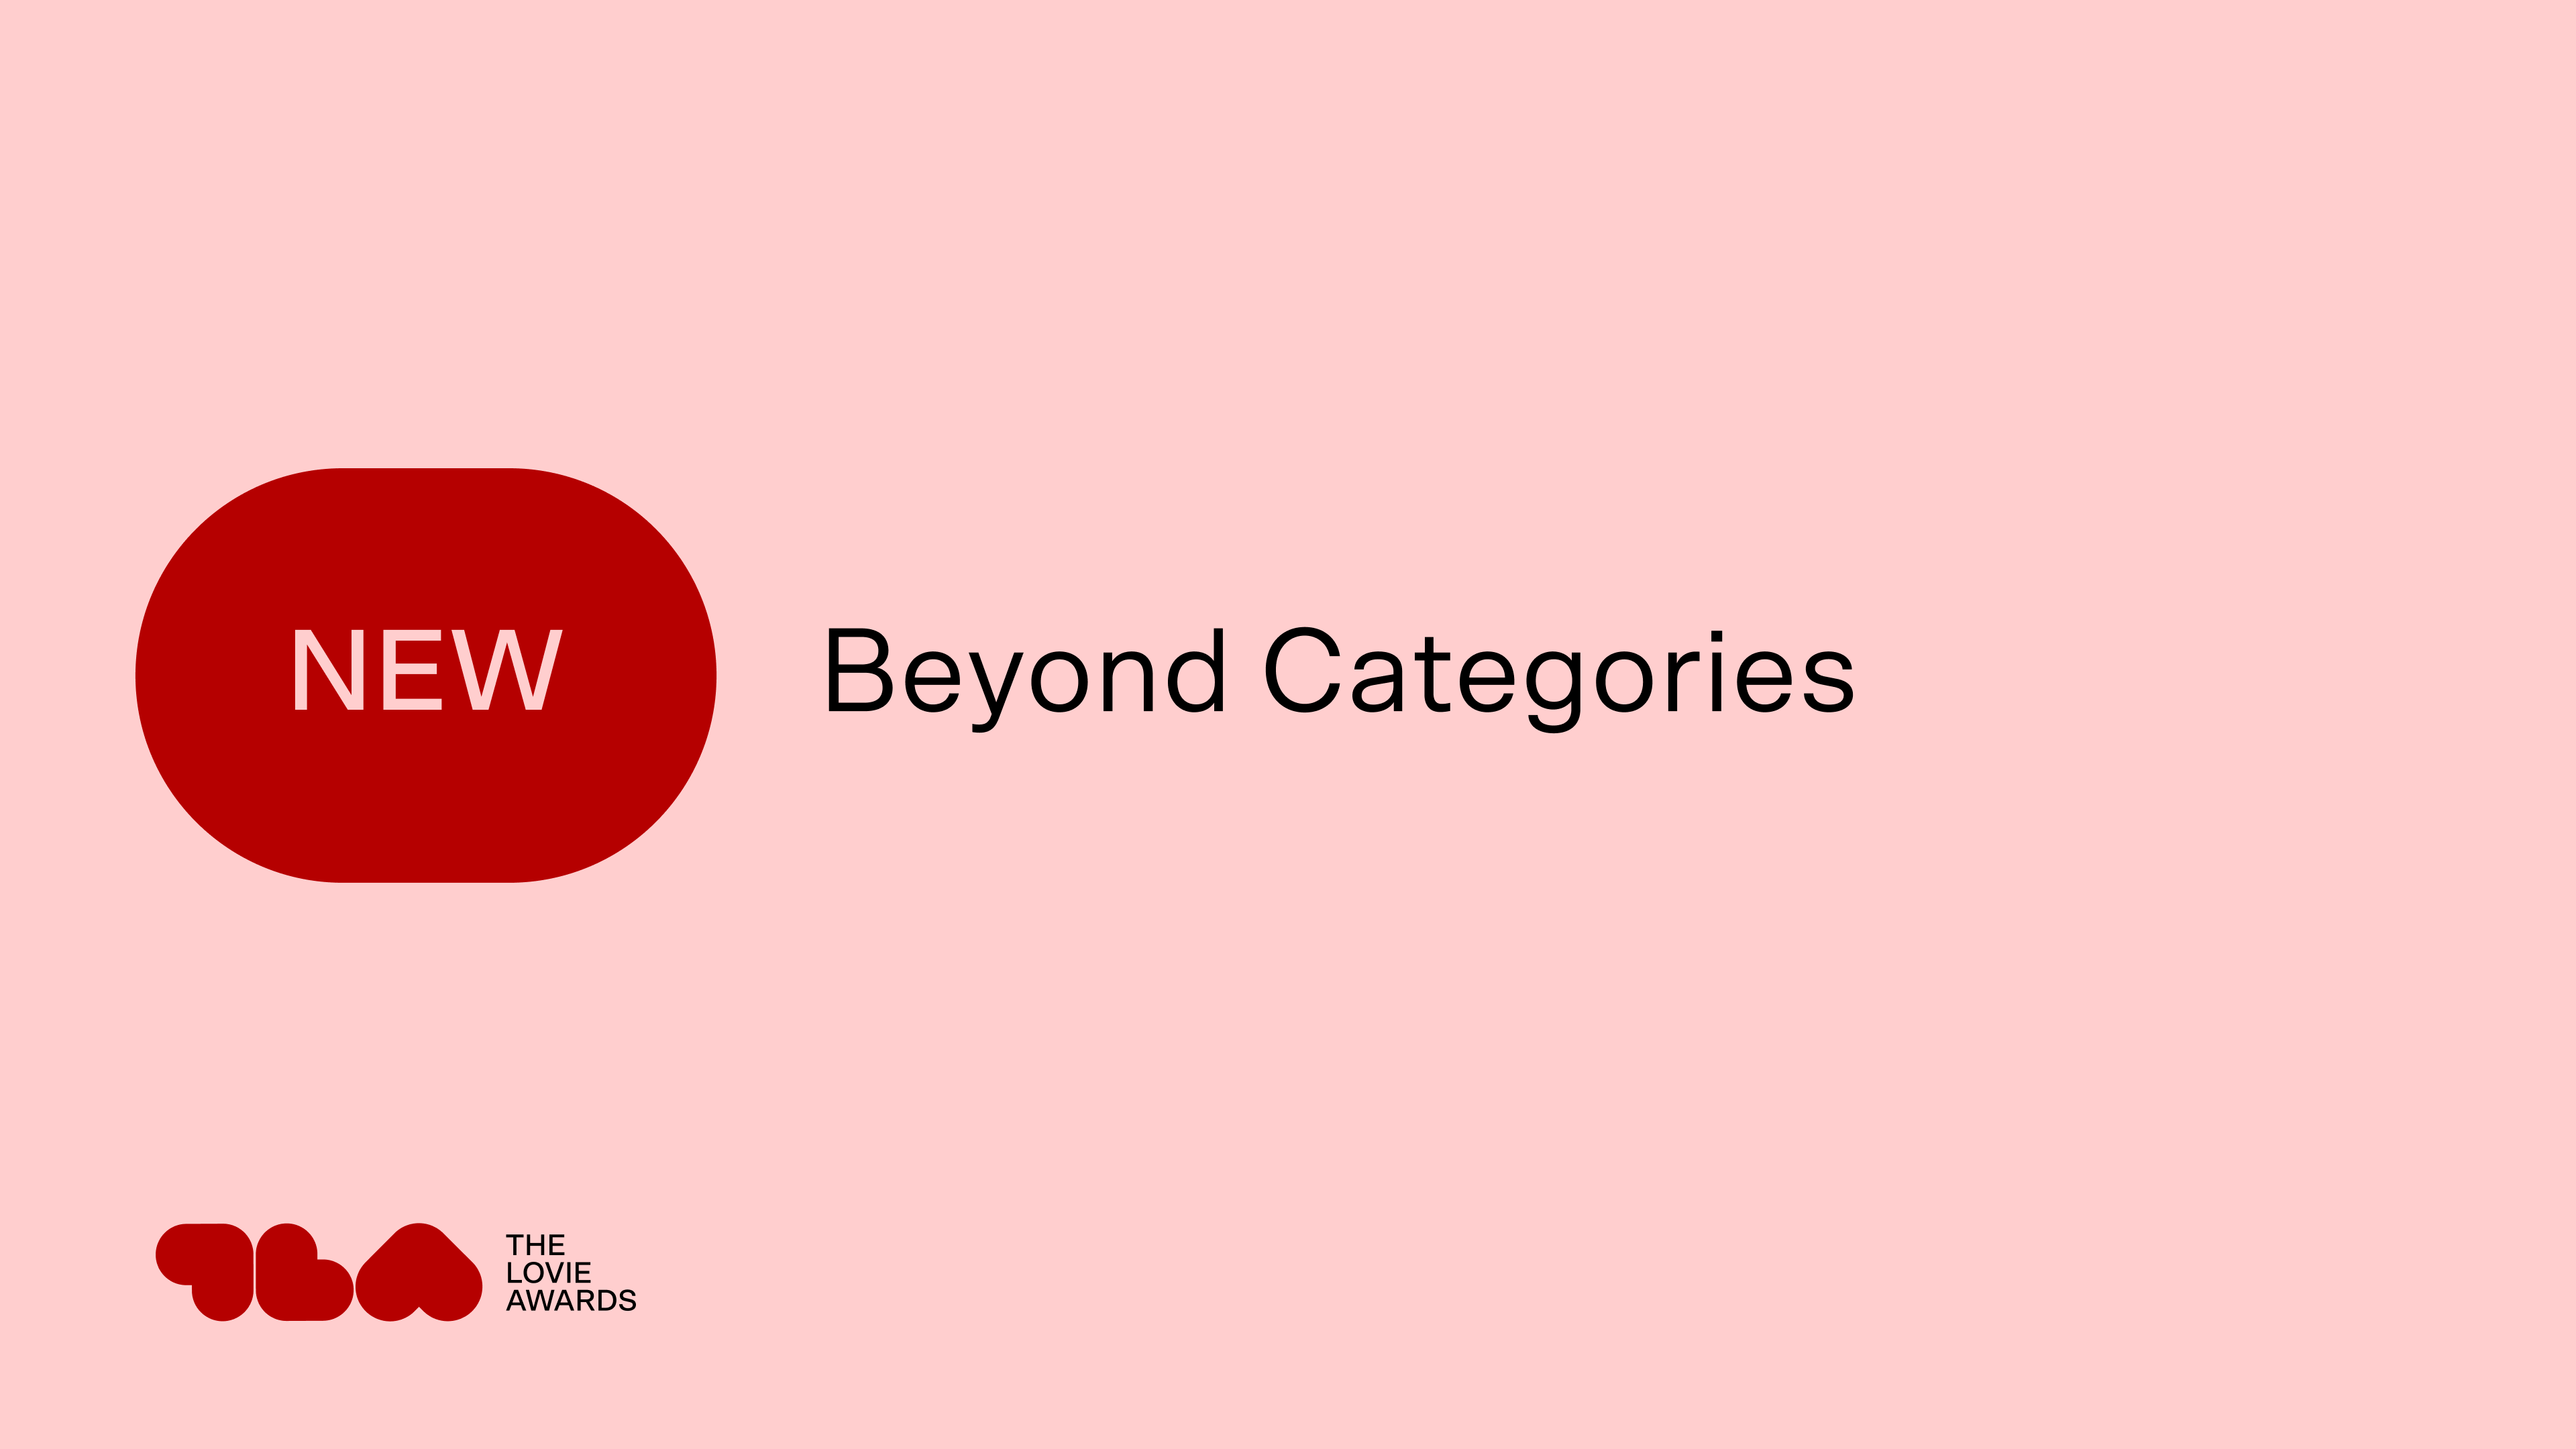 Beyond Categories: New honours for digital projects with the power to impact global society